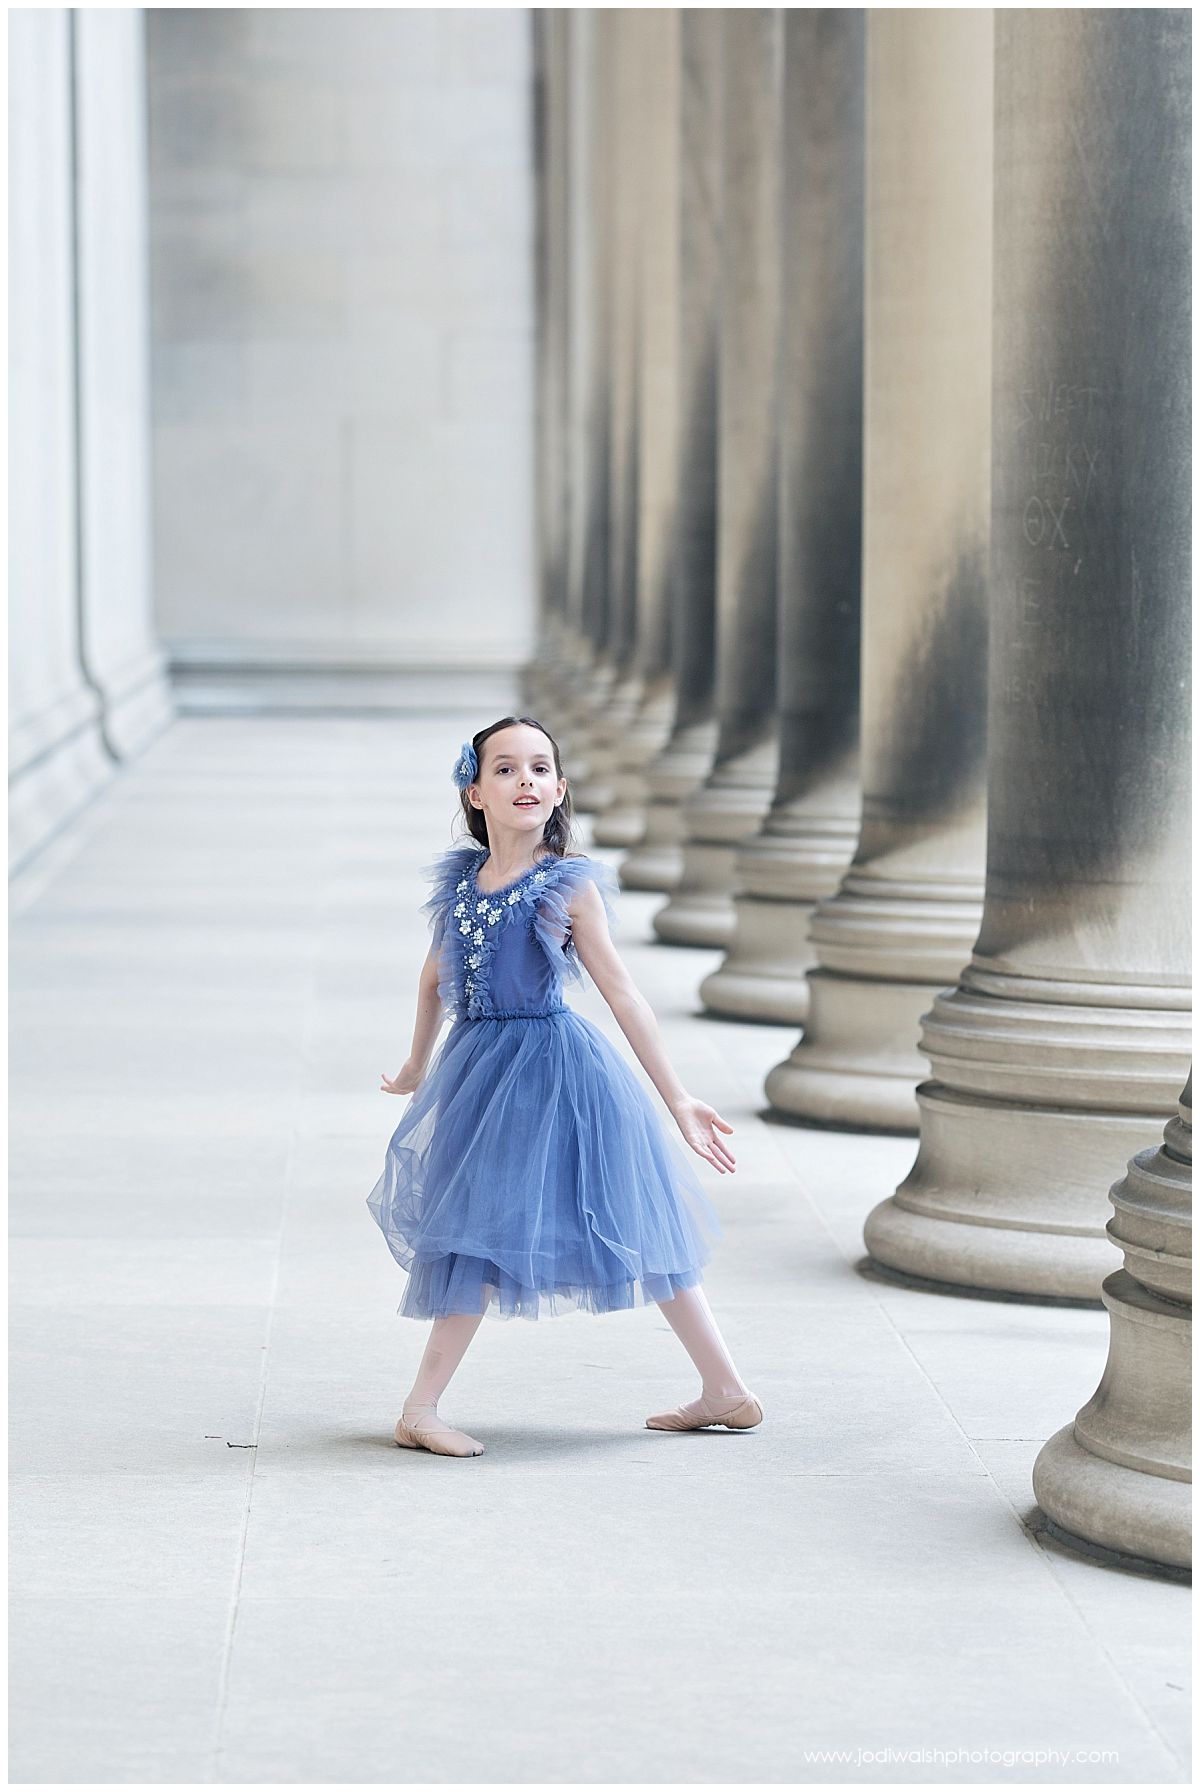 image of a young dancer with long dark hair, wearing a blue tulle dress, posed in a long hallway with stone columns